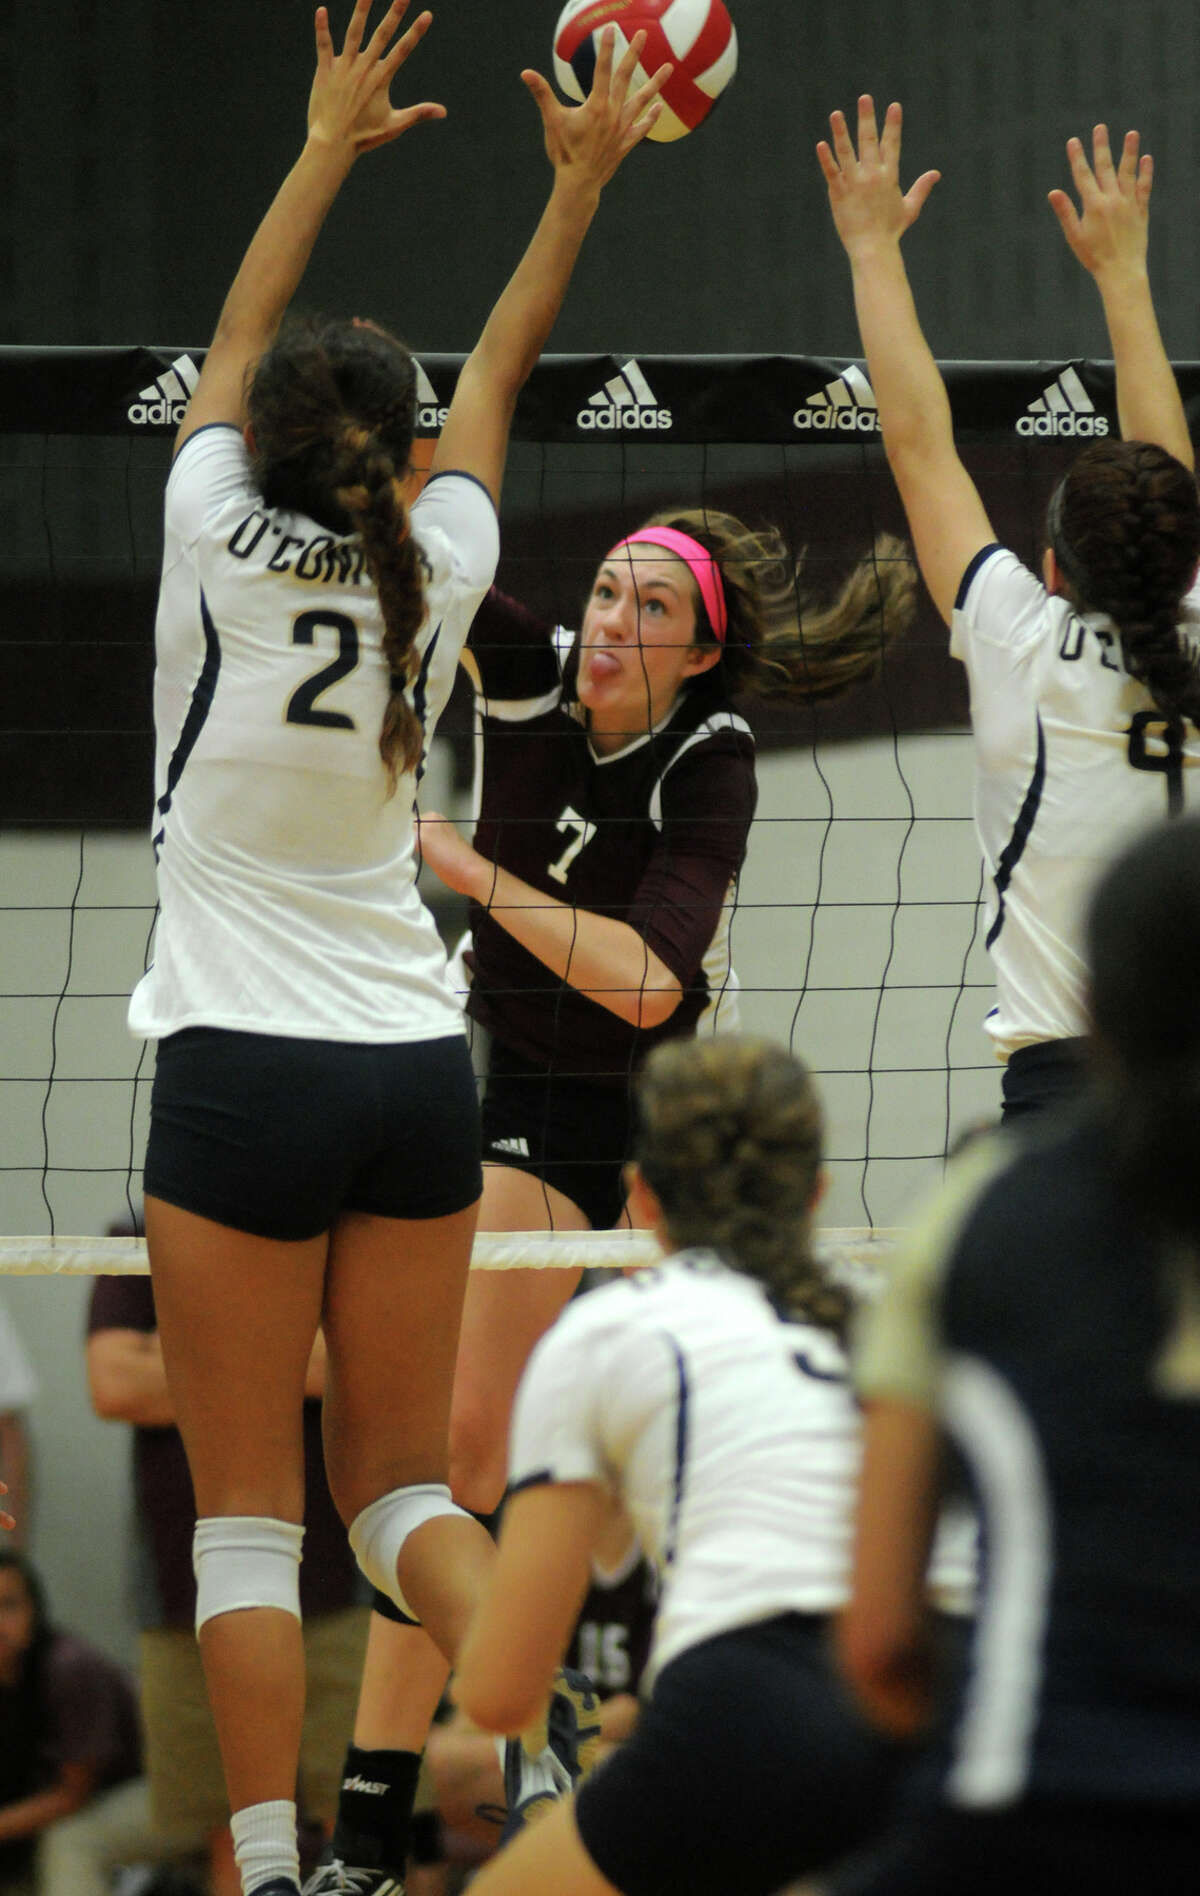 Pearland sophomore outside hitter Brooke Botkin, center, slams a ball between San Antonio O'Connor's Alex Ecker (#2) and Kaitlyn Kluna (#9) during their semifinal game at the 2014 Texas Volleyball Invitational at the Pearland High School Searcy Center on Saturday.